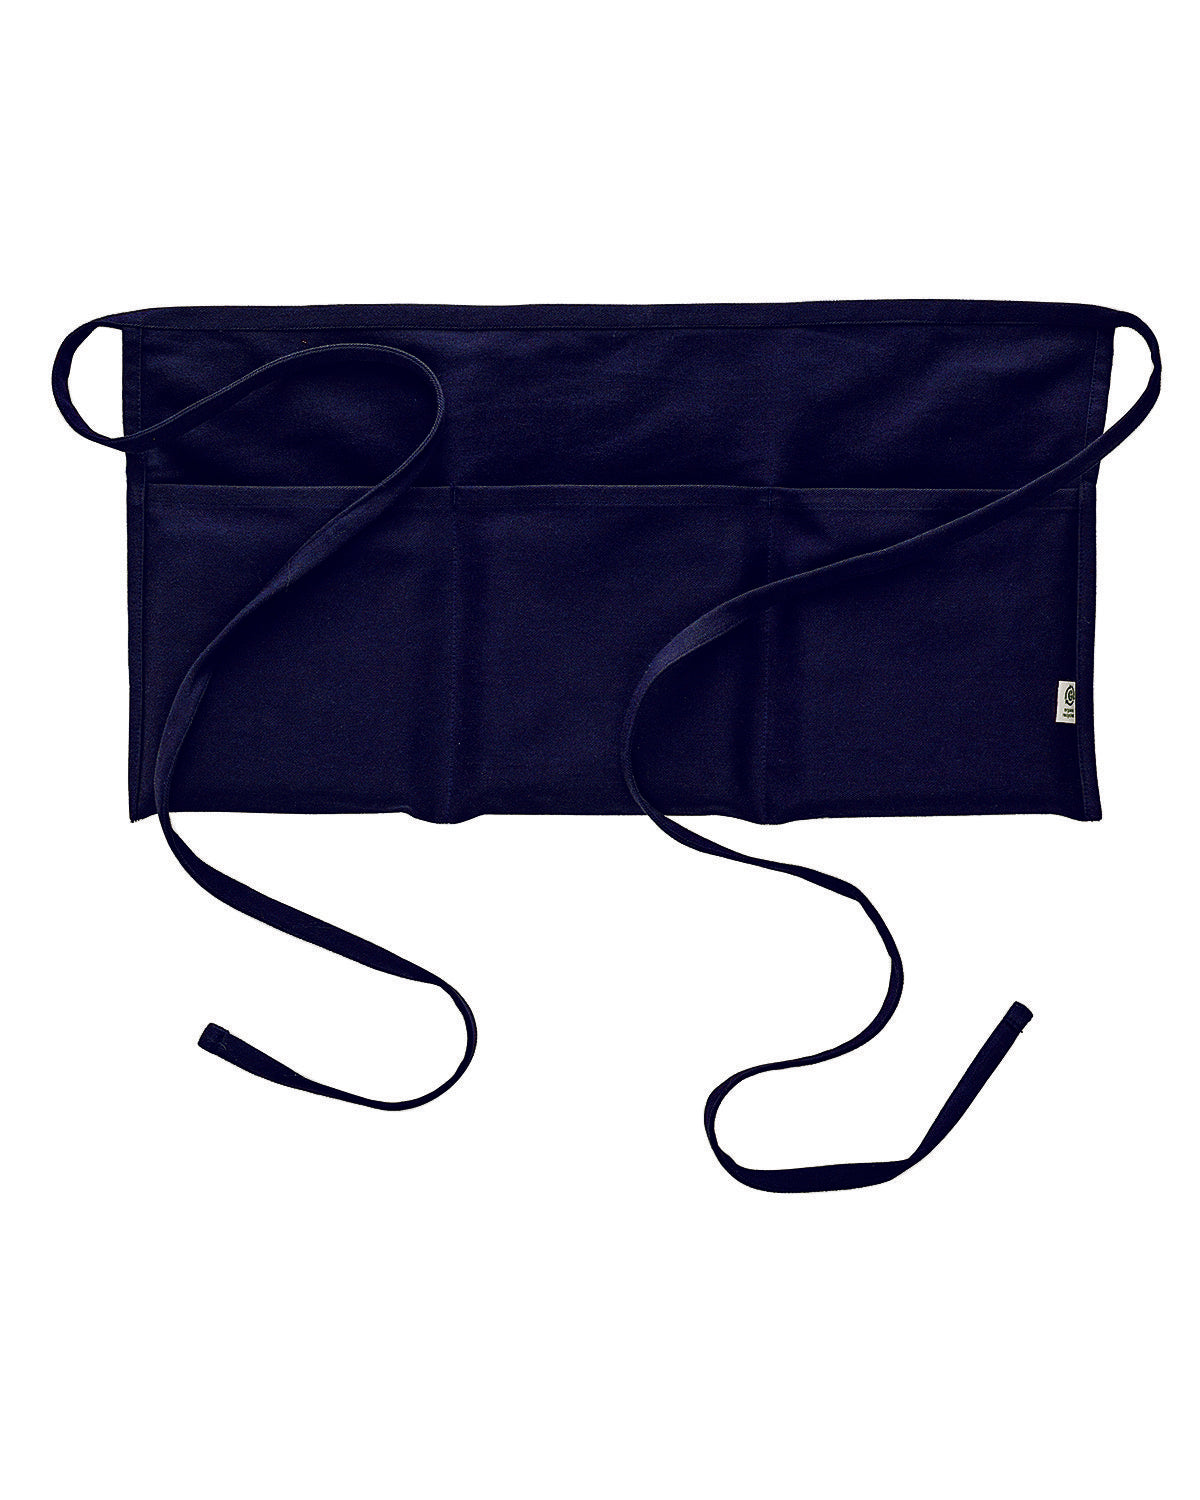 Bags and Accessories NAVY OS econscious